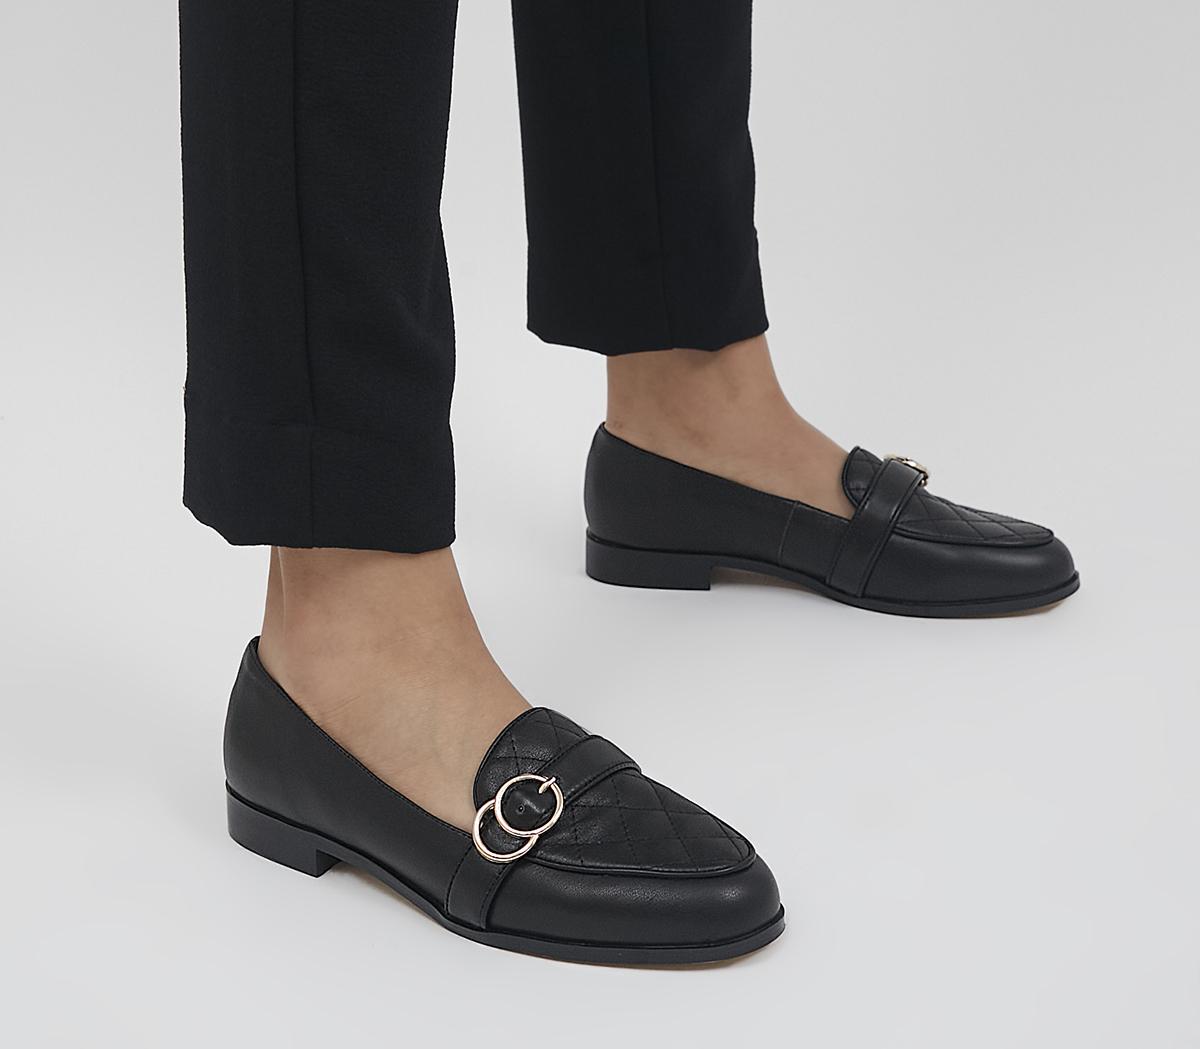 OFFICEFurnace Quilted Buckle Detail LoafersBlack Leather